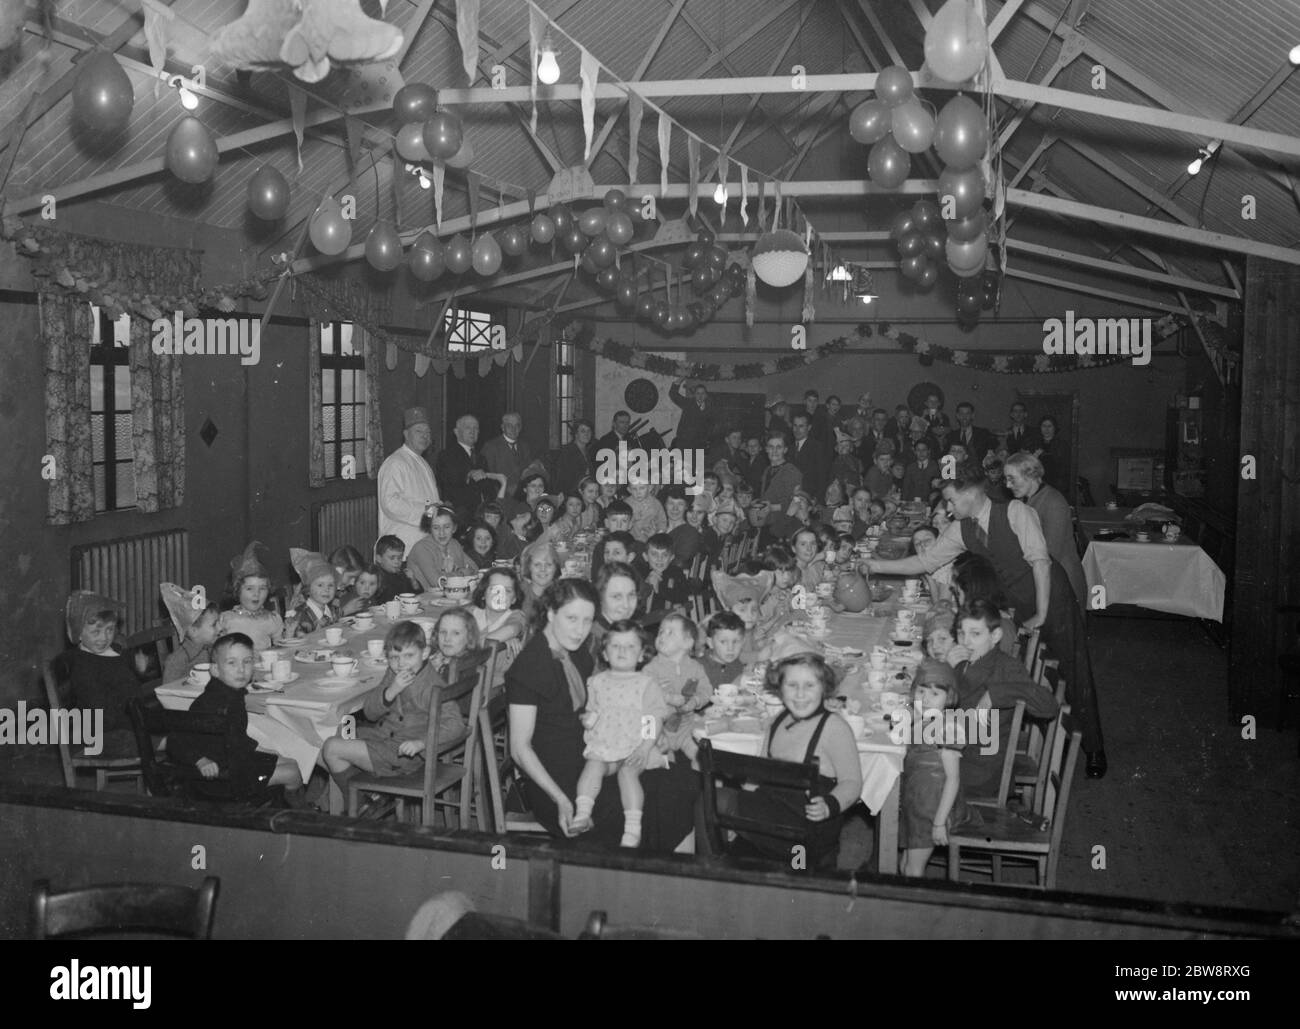 Sidcup Constitutional Club ' s Kinder ' s Partei . 1938 Stockfoto